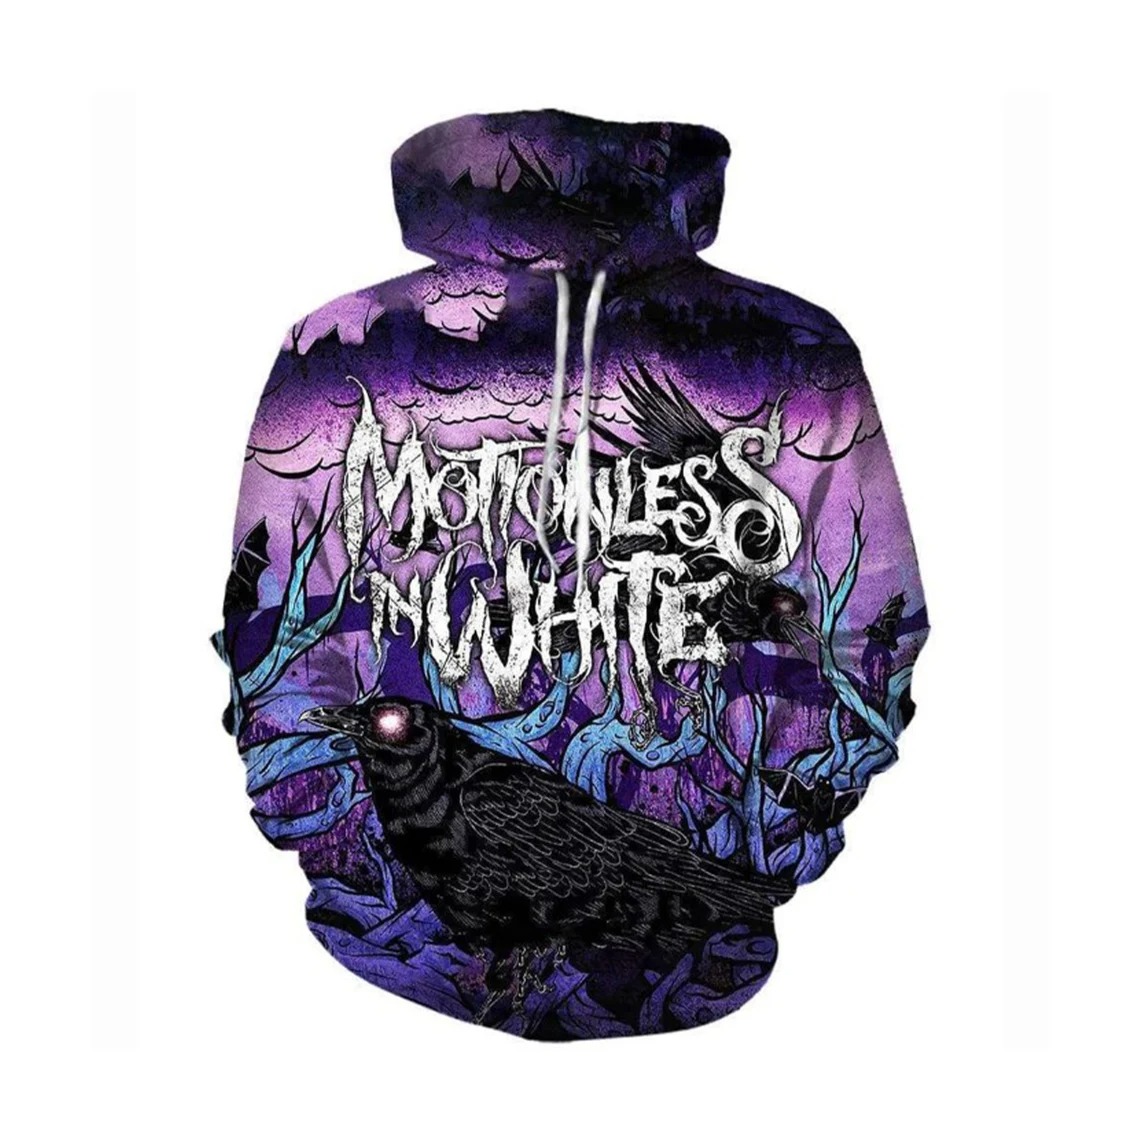 Motionless In White Band Metalcore Graphic 3d Aop Hoodie